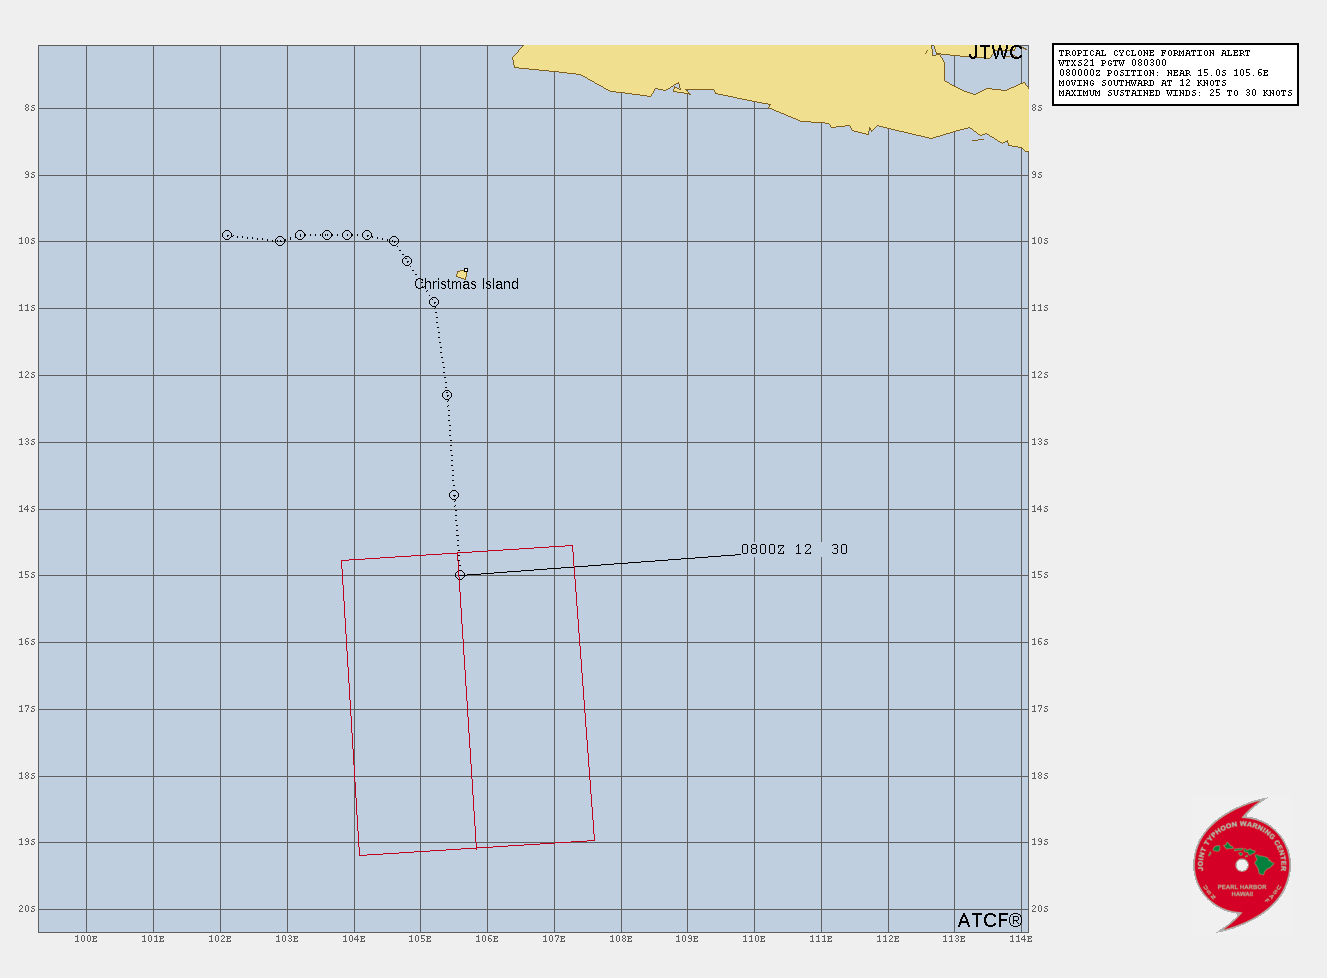 1. FORMATION OF A SIGNIFICANT TROPICAL CYCLONE IS POSSIBLE WITHIN 185 KM EITHER SIDE OF A LINE FROM 14.7S 105.6E TO 19.1S 105.8E WITHIN THE NEXT 12 TO 24 HOURS. AVAILABLE DATA DOES NOT JUSTIFY ISSUANCE OF NUMBERED TROPICAL CYCLONE WARNINGS AT THIS TIME. WINDS IN THE AREA ARE ESTIMATED TO BE 25 TO 30 KNOTS. METSAT IMAGERY AT 080230Z INDICATES THAT A CIRCULATION CENTER IS LOCATED NEAR 15.0S 105.6E. THE SYSTEM IS MOVING SOUTHWARD AT 22 KM/H. 2. REMARKS: THE AREA OF CONVECTION (INVEST 93S) PREVIOUSLY LOCATED  NEAR 11.5S 105.4E IS NOW LOCATED NEAR 13.8S 105.5E, APPROXIMATELY  375 KM SOUTH OF CHRISTMAS ISLAND. ANIMATED MULTISPECTRAL IMAGERY AND  A 072335Z SSMIS 91GHZ IMAGE DEPICT A LOW LEVEL CIRCULATION (LLCC)  WITH DEEP BANDING WRAPPING INTO THE LLCC. IN ADDITION, THERE IS  BROAD, DEEP CONVECTION WITHIN THE CENTRAL AND NORTHERN PERIPHERIES  OF THE SYSTEM. ENVIRONMENTAL ANALYSIS INDICATES FAVORABLE CONDITIONS  FOR DEVELOPMENT TO INCLUDE FAIR POLEWARD OUTFLOW, LOW (10-15KT)  VERTICAL WIND SHEAR, AND VERY WARM (29-30) SEA SURFACE TEMPERATURES.  GLOBAL MODELS ARE IN AGREEMENT THAT THE INVEST 93S IS A COMPACT  SYSTEM THAT WILL TRACK WEST-SOUTHWEST SLOWLY INTENSIFYING OVER THE  NEXT 24-48 HOURS. MAXIMUM SUSTAINED SURFACE WINDS ARE ESTIMATED AT  25 TO 30 KNOTS. MINIMUM SEA LEVEL PRESSURE IS ESTIMATED TO BE NEAR  1002 MB. THE POTENTIAL FOR THE DEVELOPMENT OF A SIGNIFICANT TROPICAL  CYCLONE WITHIN THE NEXT 24 HOURS IS HIGH.